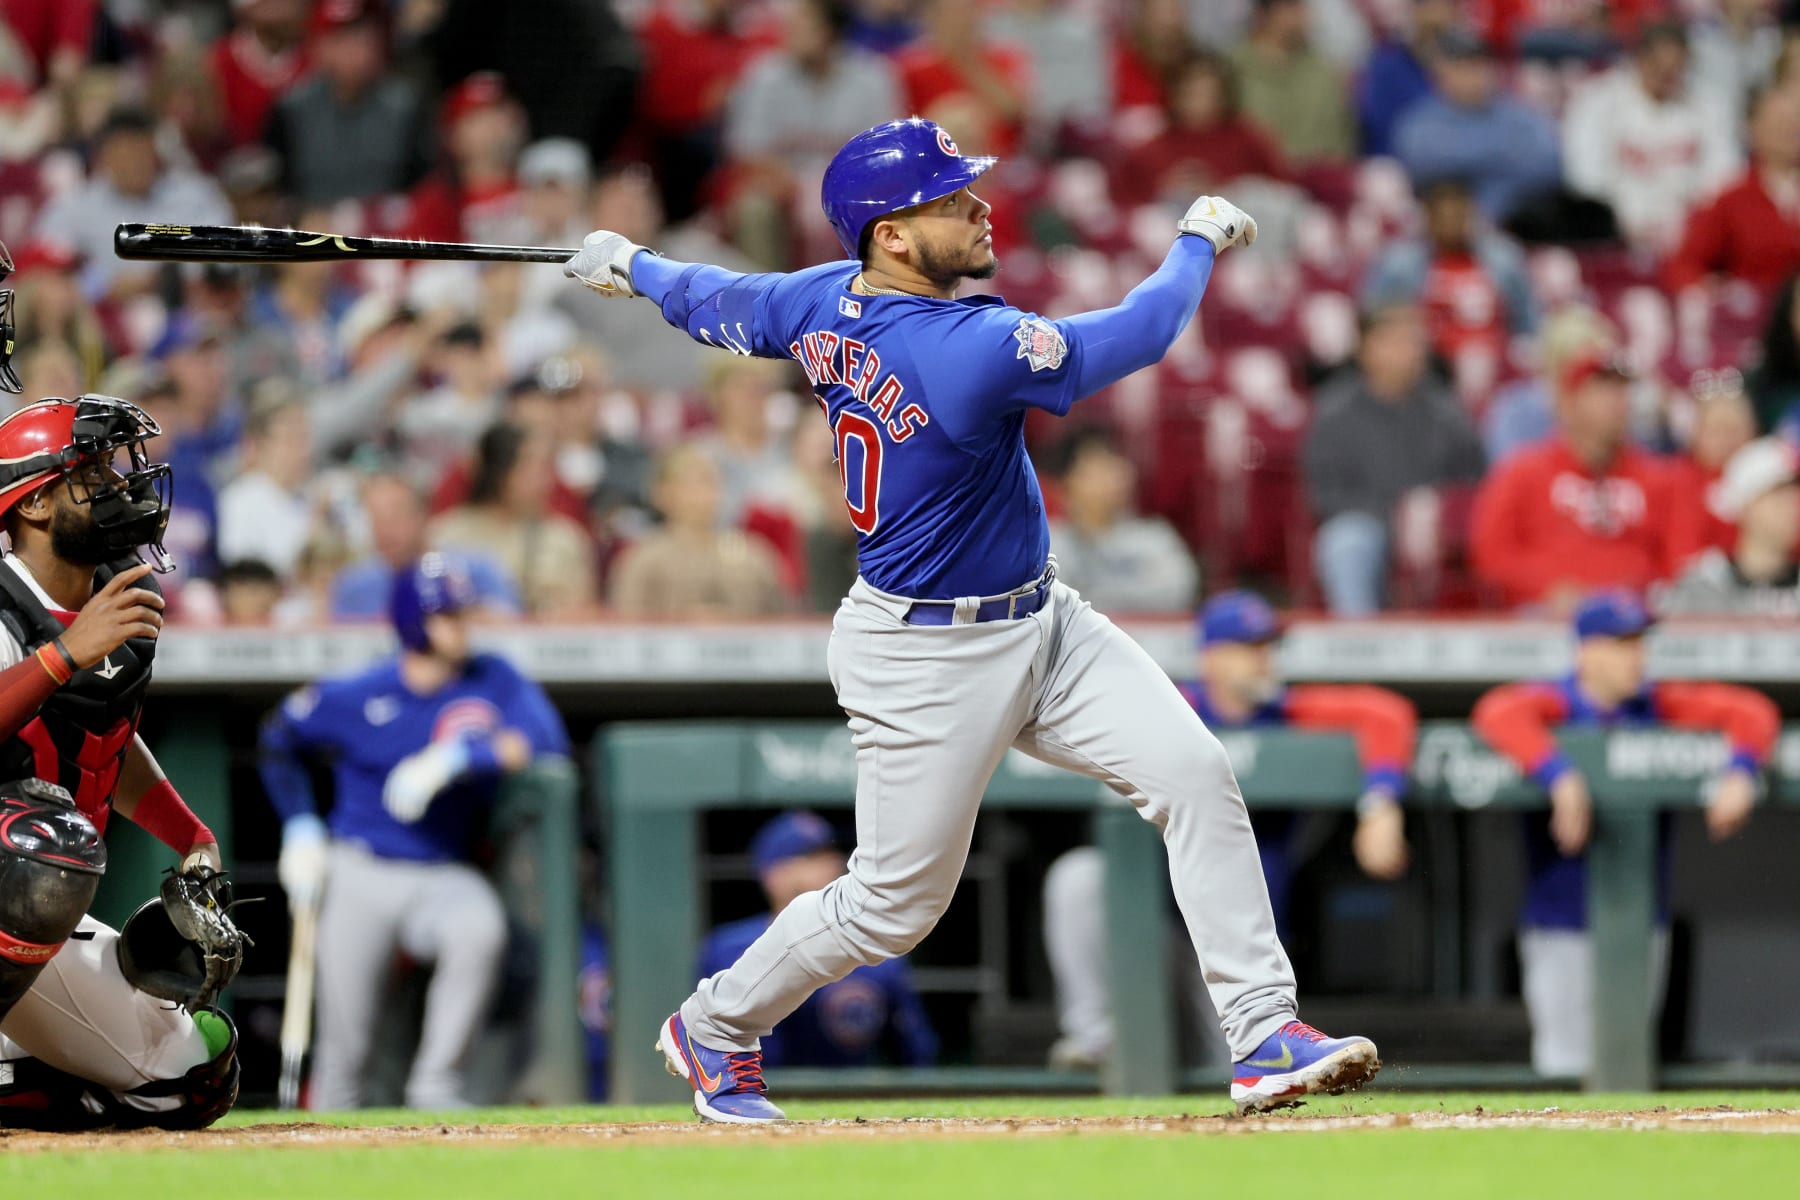 Mets Rumors: Mets are talking with the Cubs about Contreras